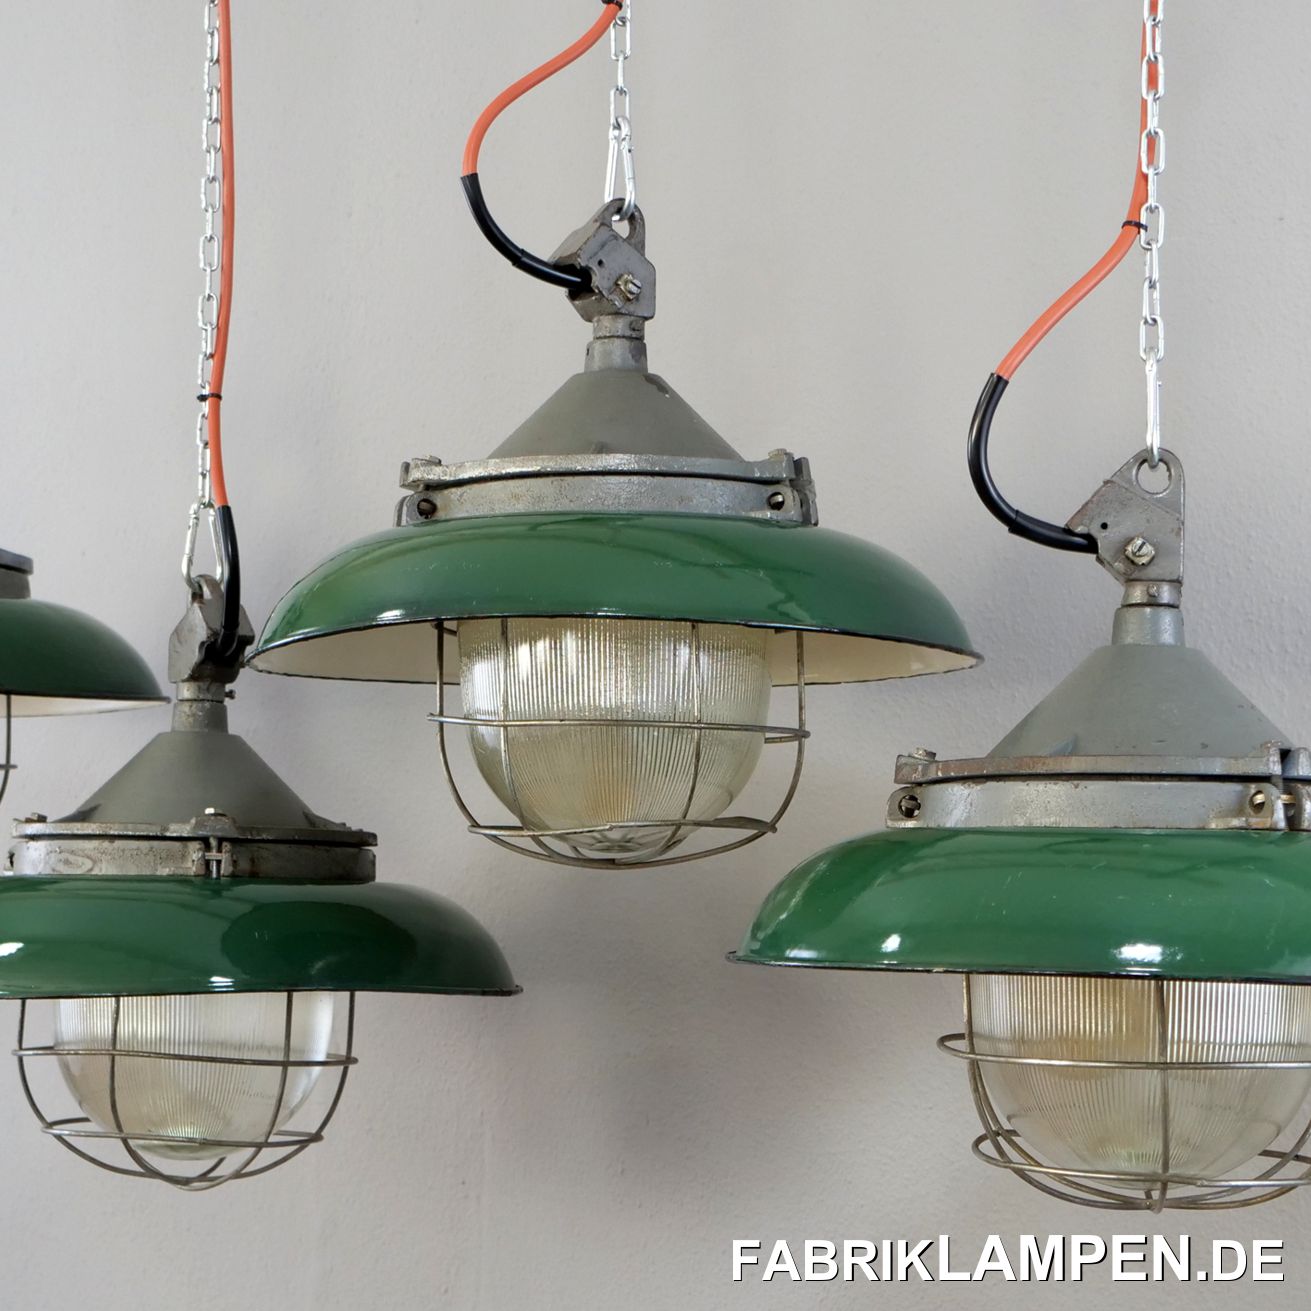  Old green industrial lamp with enamel shade. A classic bunker lamp made with a shade. These lamps exist in two colours: light grey and green. We have both versions in stock. Material: green (inside white) enamelled sheet steel, cast iron housing, protective glass and steel grid. The lamps have the traces of the past decades (discolourations, small chips, rust spots and so on - we have treated them all). The headboards have been refurbished. The old industrial lamps have been restored: cleaned and conserved. The factory lamps are newly electrified, with new E27 ceramic sockets, the complete interior is new.Your old industrial lamp will be delivered with 2 metres of cable (other lengths are of course possible) and with the original, massive suspension eye for safe hanging. For an extra charge, the factory lamps can also be supplied with chain suspension. We can also offer canopies.Old green industrial lamp, the dimensions: Diameter lamp (shade) 41 cm, height 30 cm. 